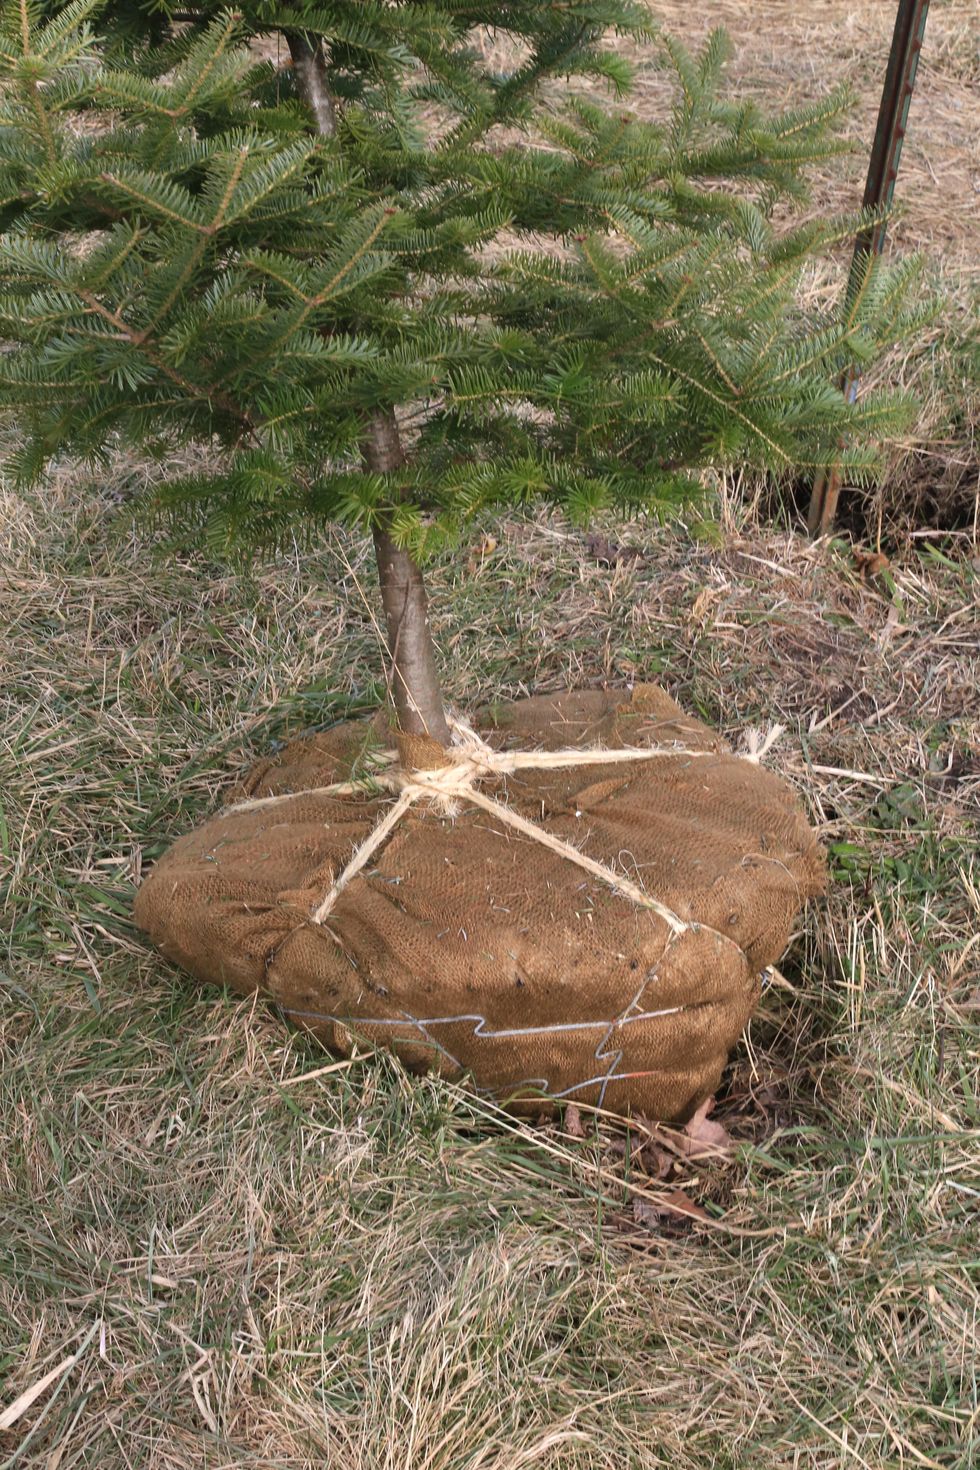 Root ball in burlap from a transplanted evergreen tree